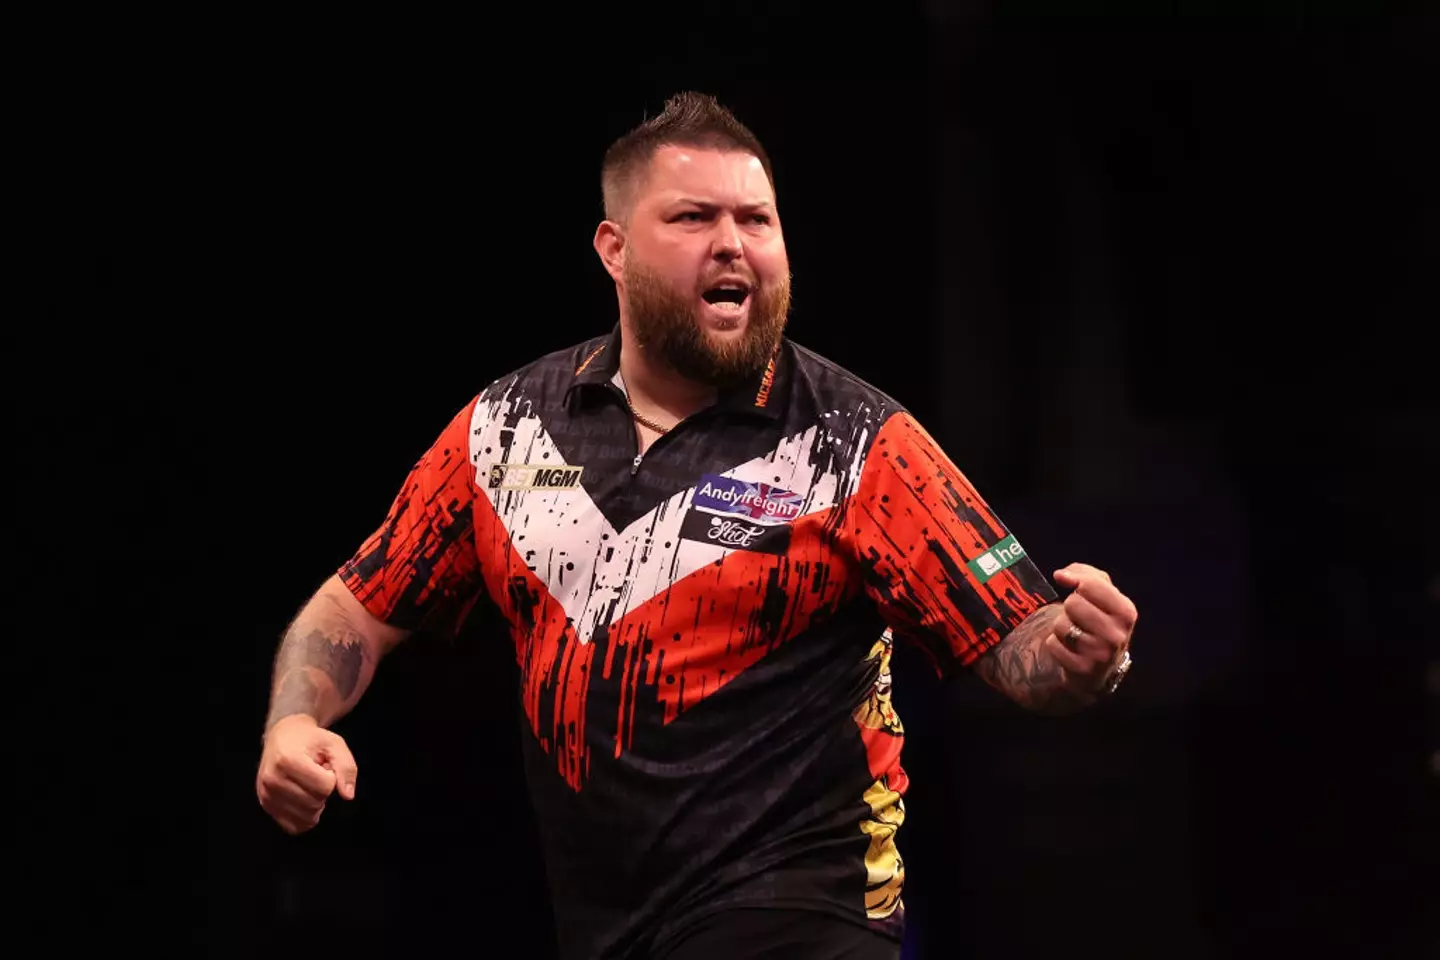 Michael Smith (pictured) and Luke Humphries will play for England at the World Cup of Darts (